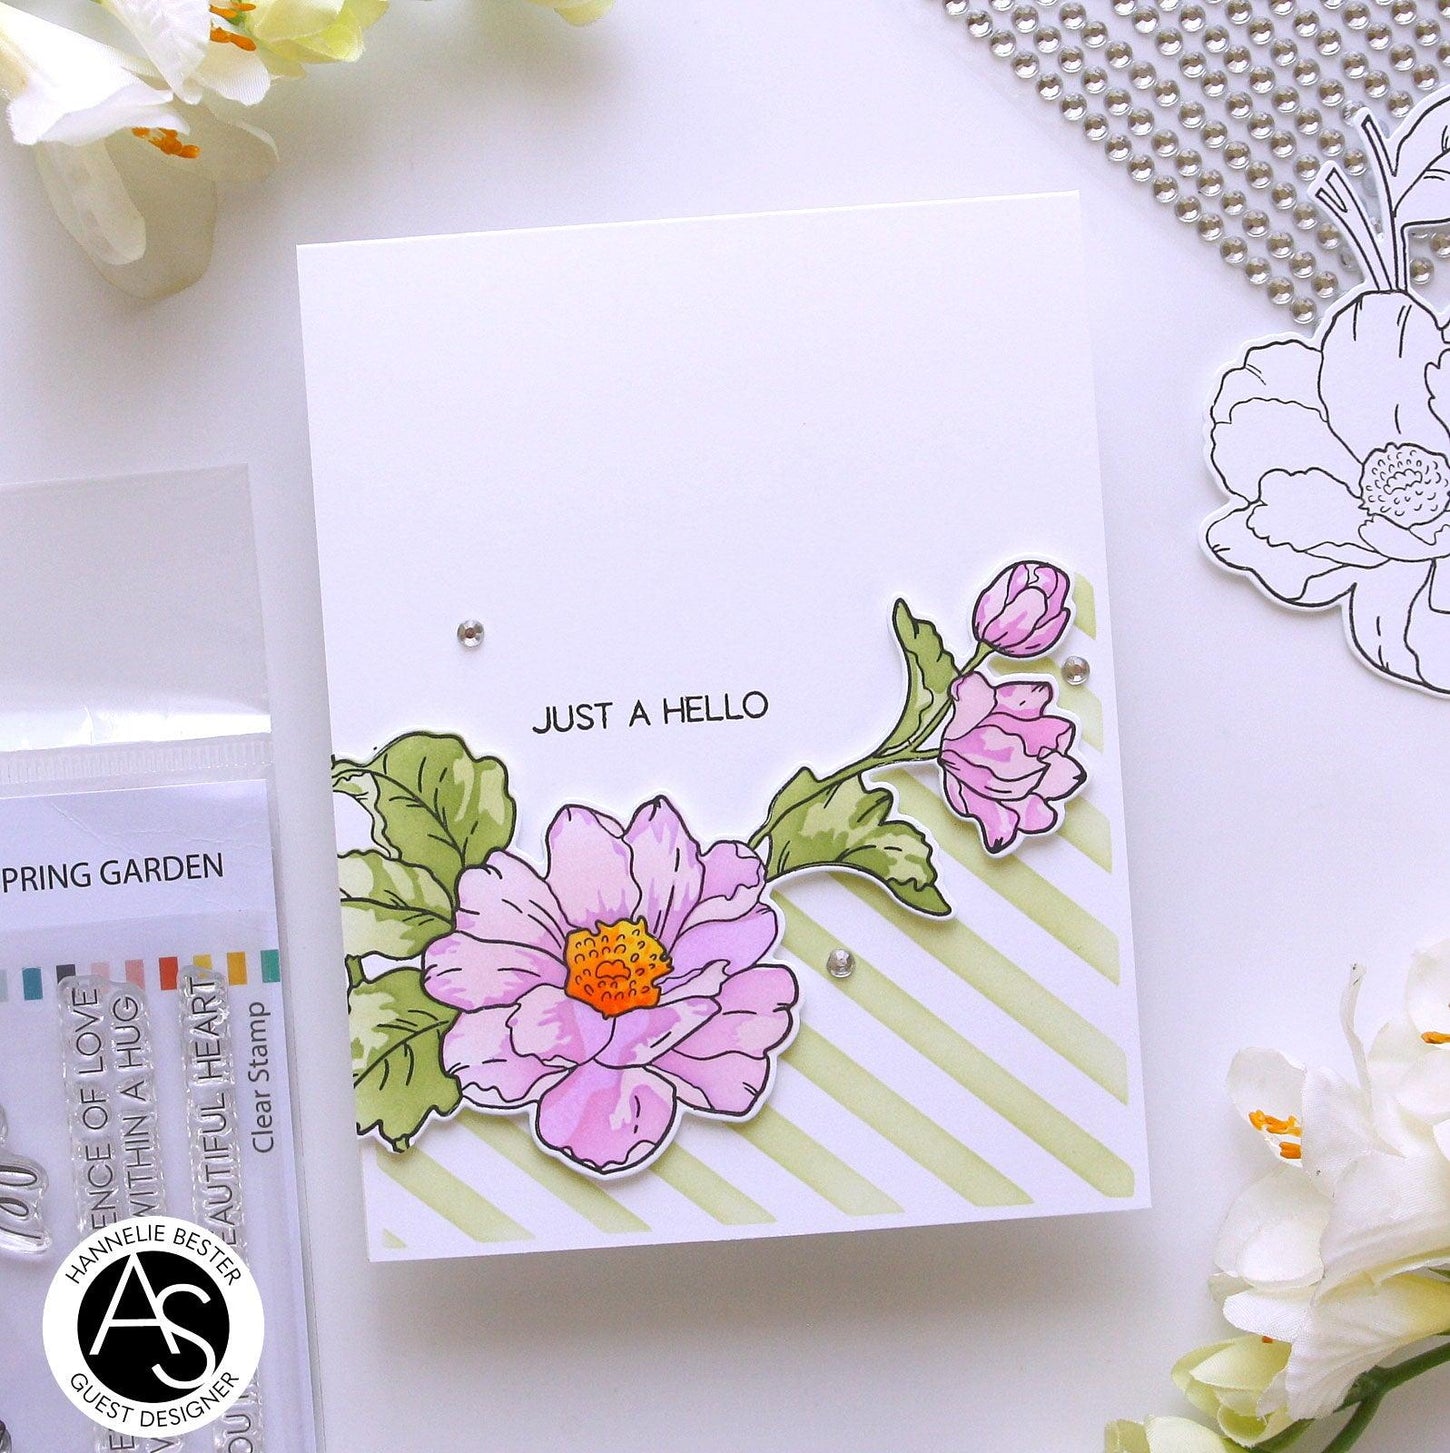 spring-garden-stamp-set-layering-stencil-alex-syberia-designs-flowers-coloring-cardmaking-tutorials-blog-love-you-cascards-clean-and-simple-cards-hello-cards